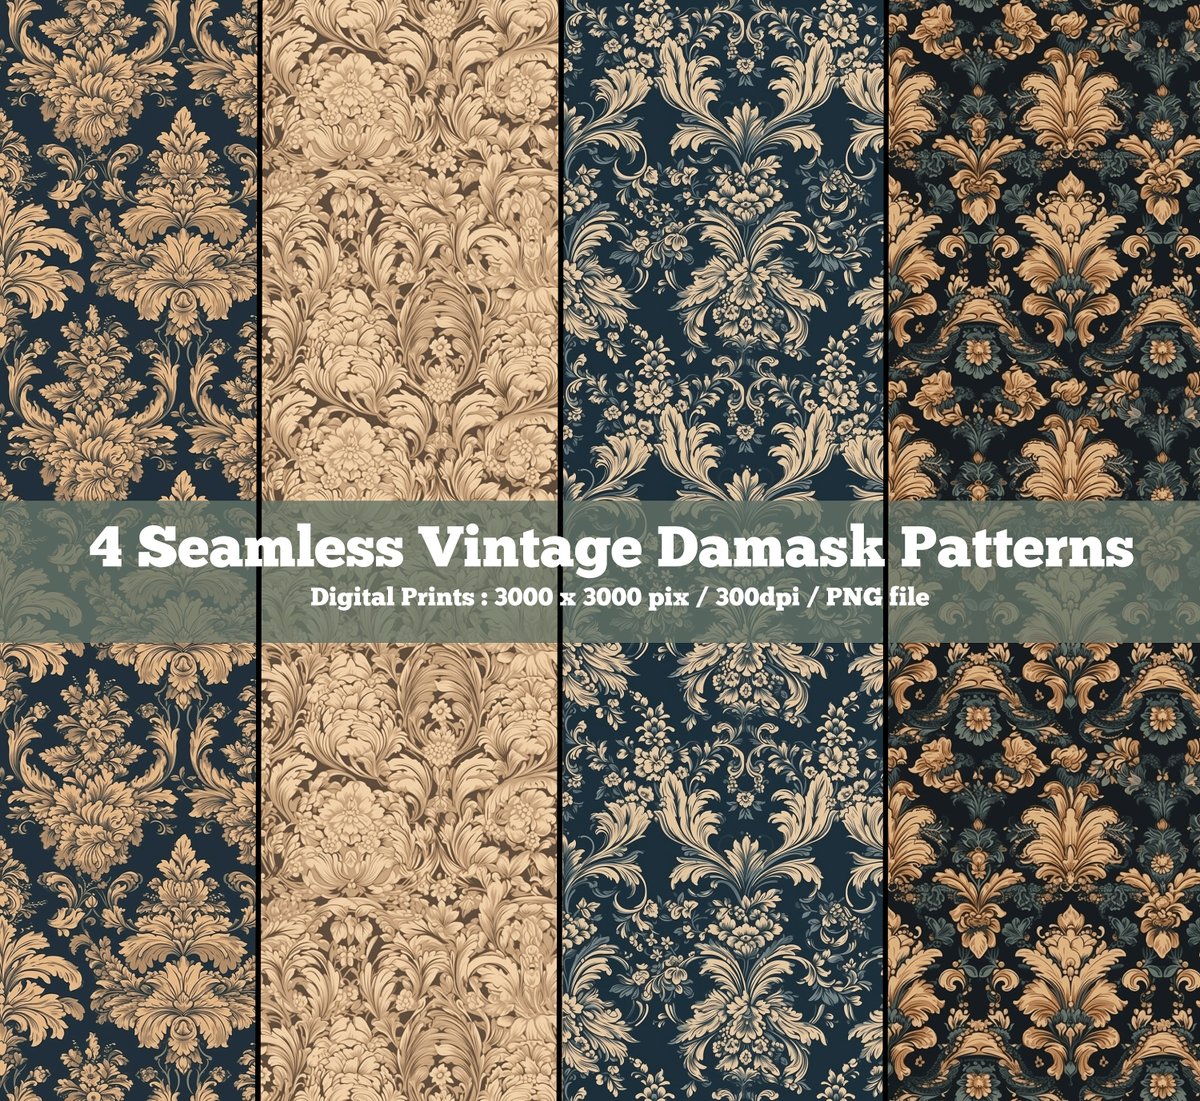 Excited to share the latest addition to my #etsy shop: Seamless Damask Vintage Pattern etsy.me/3zM2wBt #vintagefloral #mutedcolors #floralpattern #retrodesign #vintagestyle #natureinspired #bohochic #floralart #eclecticstyle